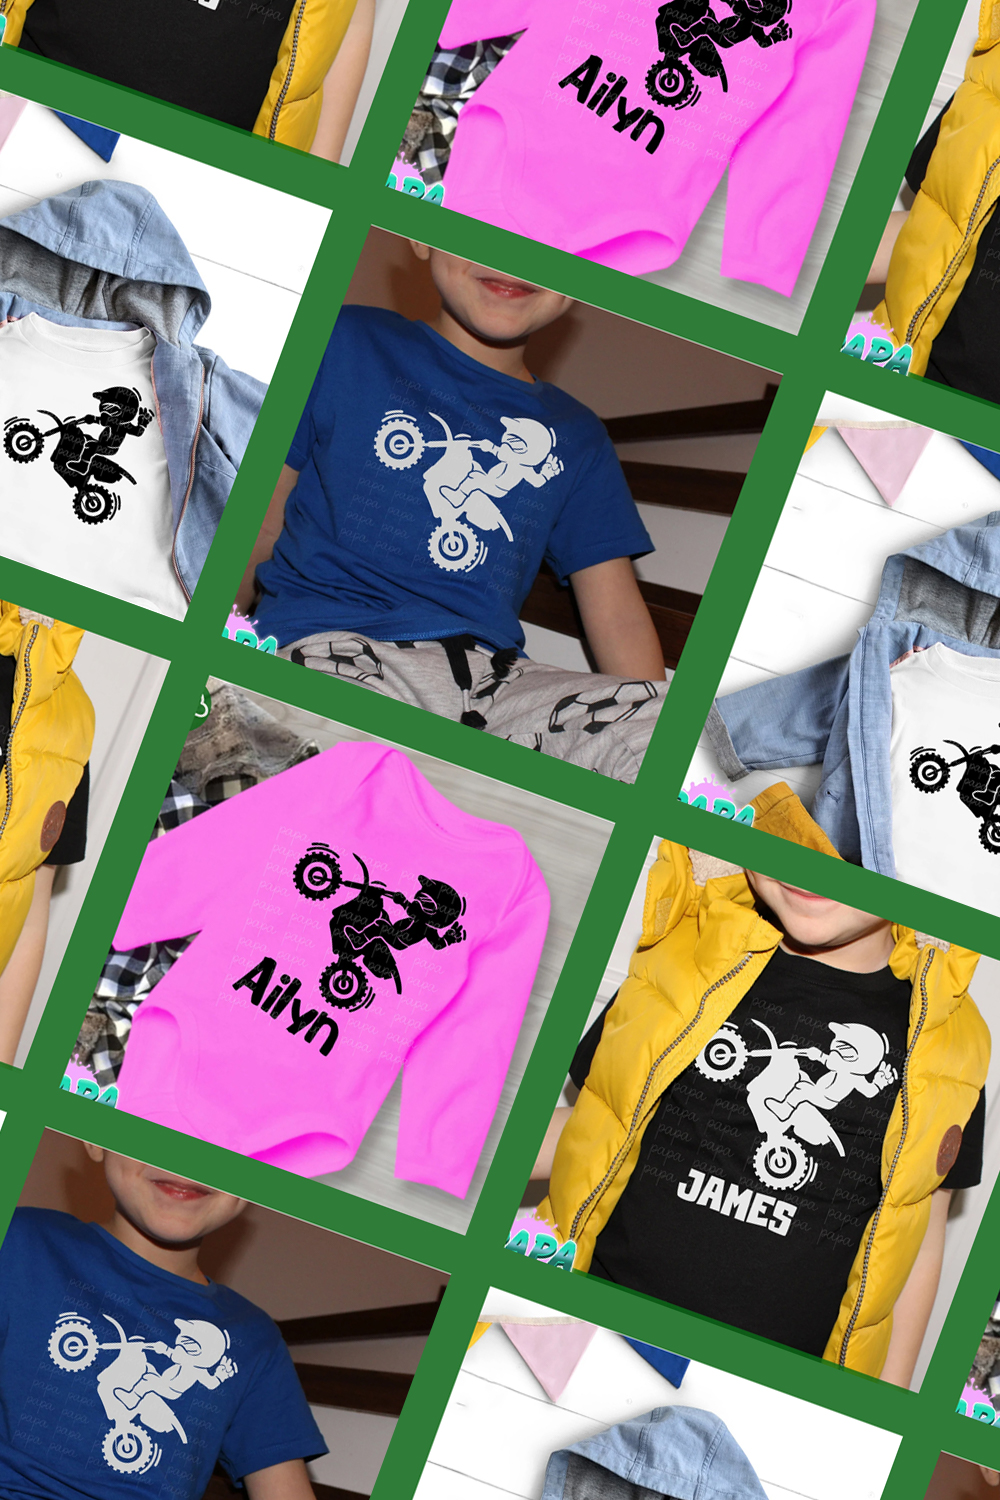 Preview of prints with children's print on clothes.